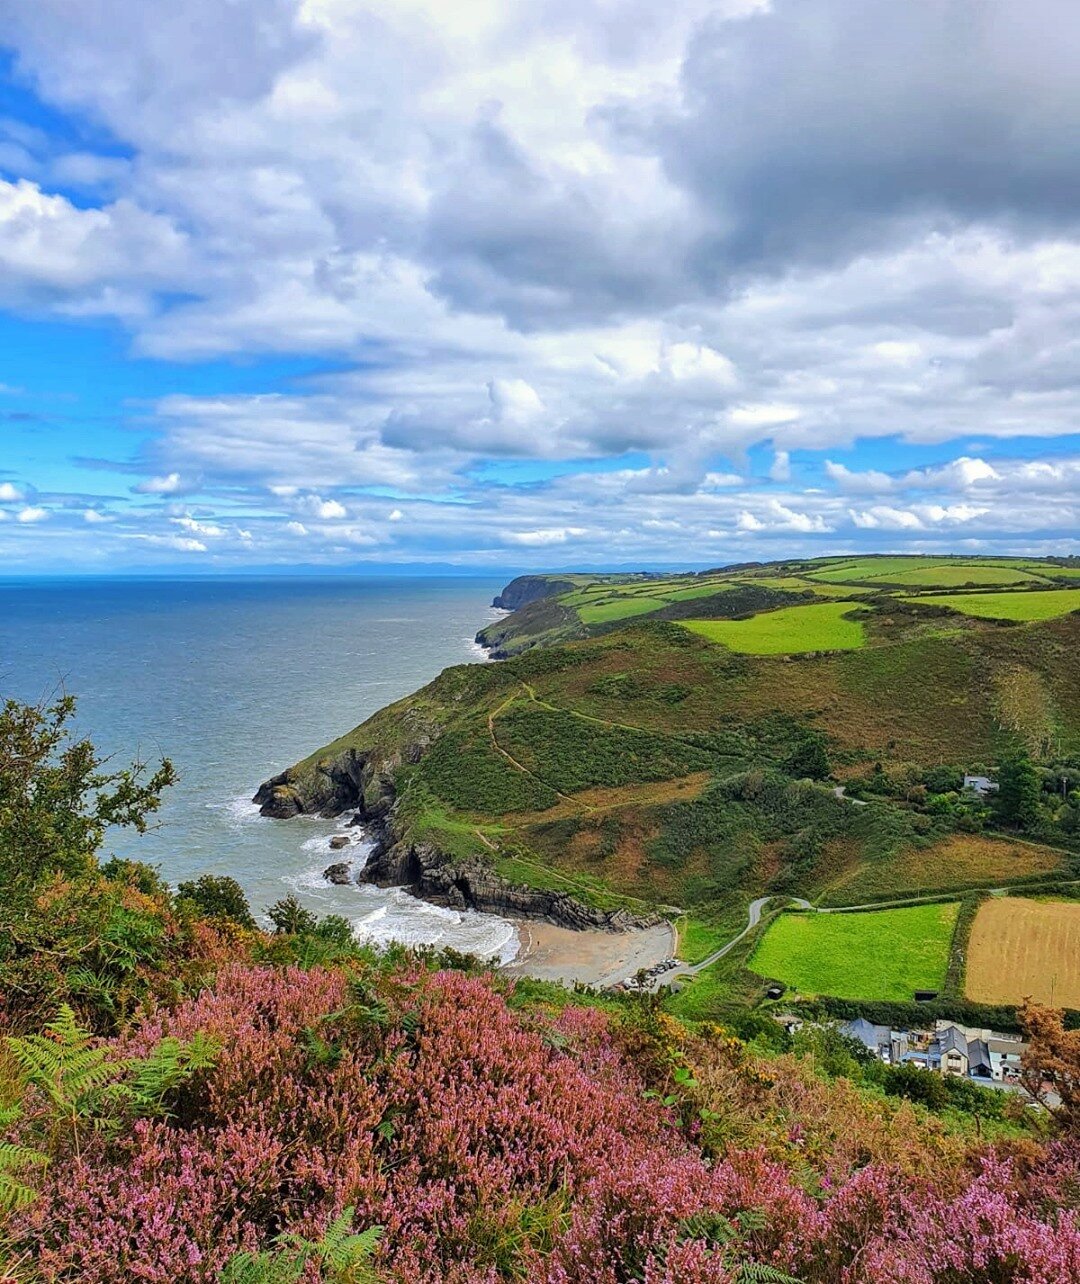 🌊CWMTYDU🌊⁣
⁣
Last Saturday we took a spin to Cwmtydu and walked the @walescoastpath towards Llangrannog with beautiful views of Ynys Lochtyn and across Cardigan Bay 💙⁣
⁣
You can walk in the other direction towards New Quay and see Castell Bach &am